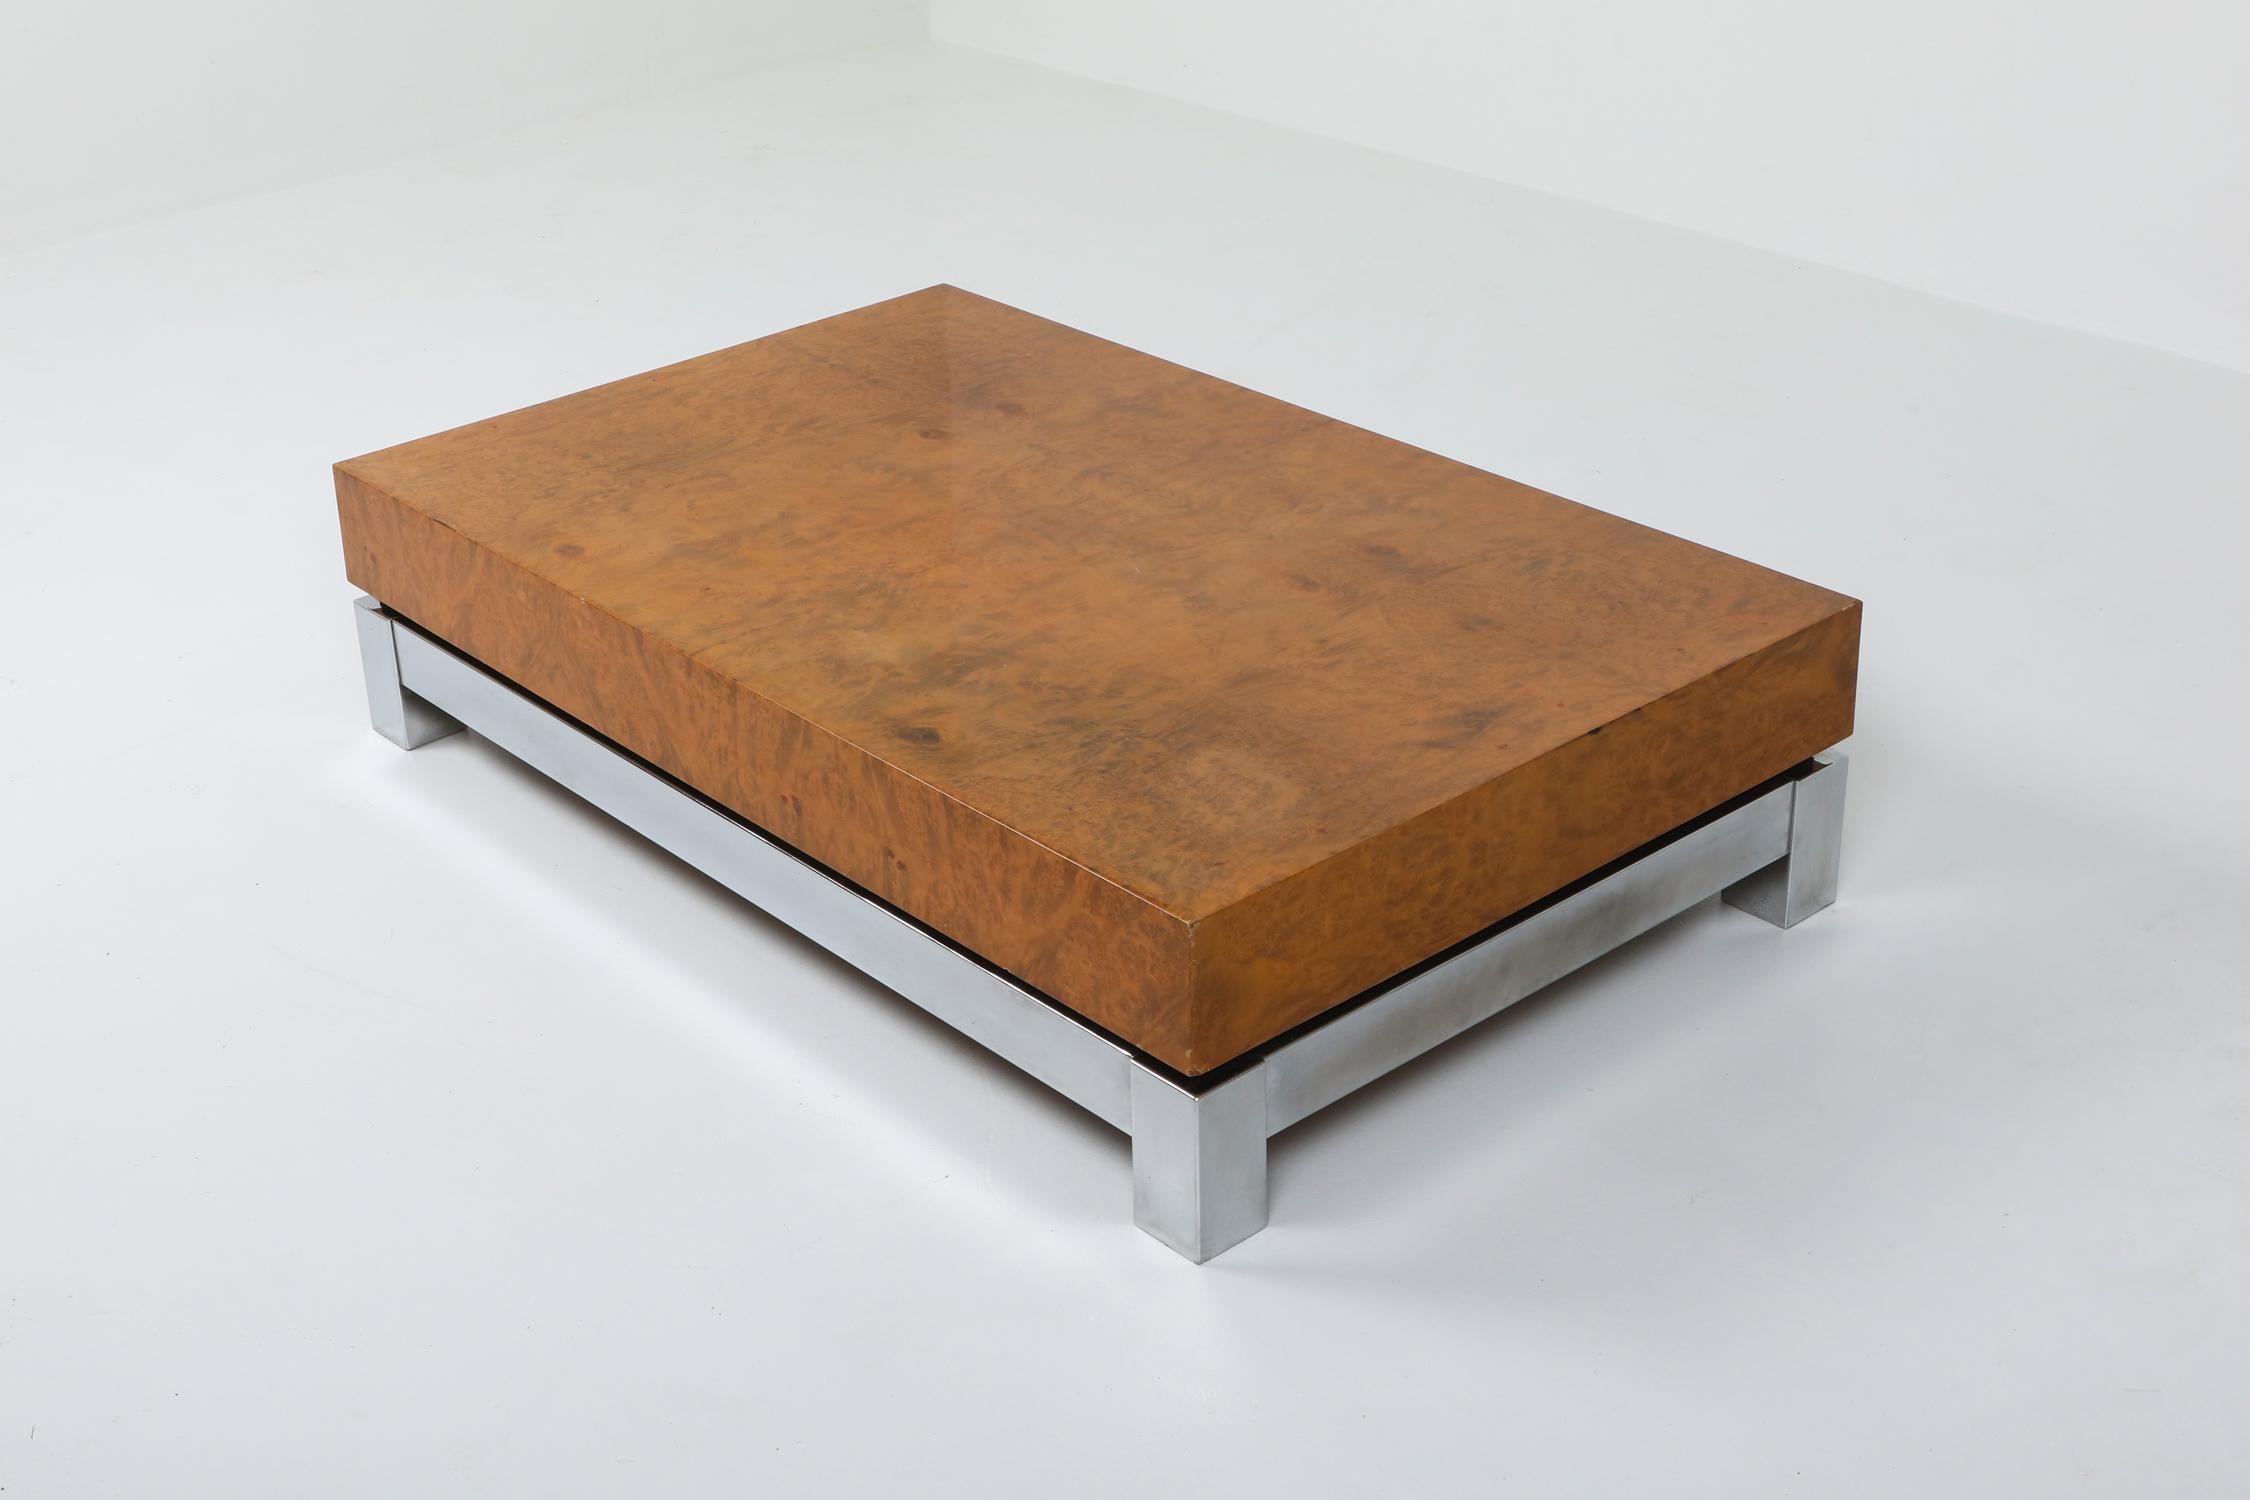 Hollywood Regency rectangular burl veneer coffee table with chrome feet in the style of  Made in France, 1970s.